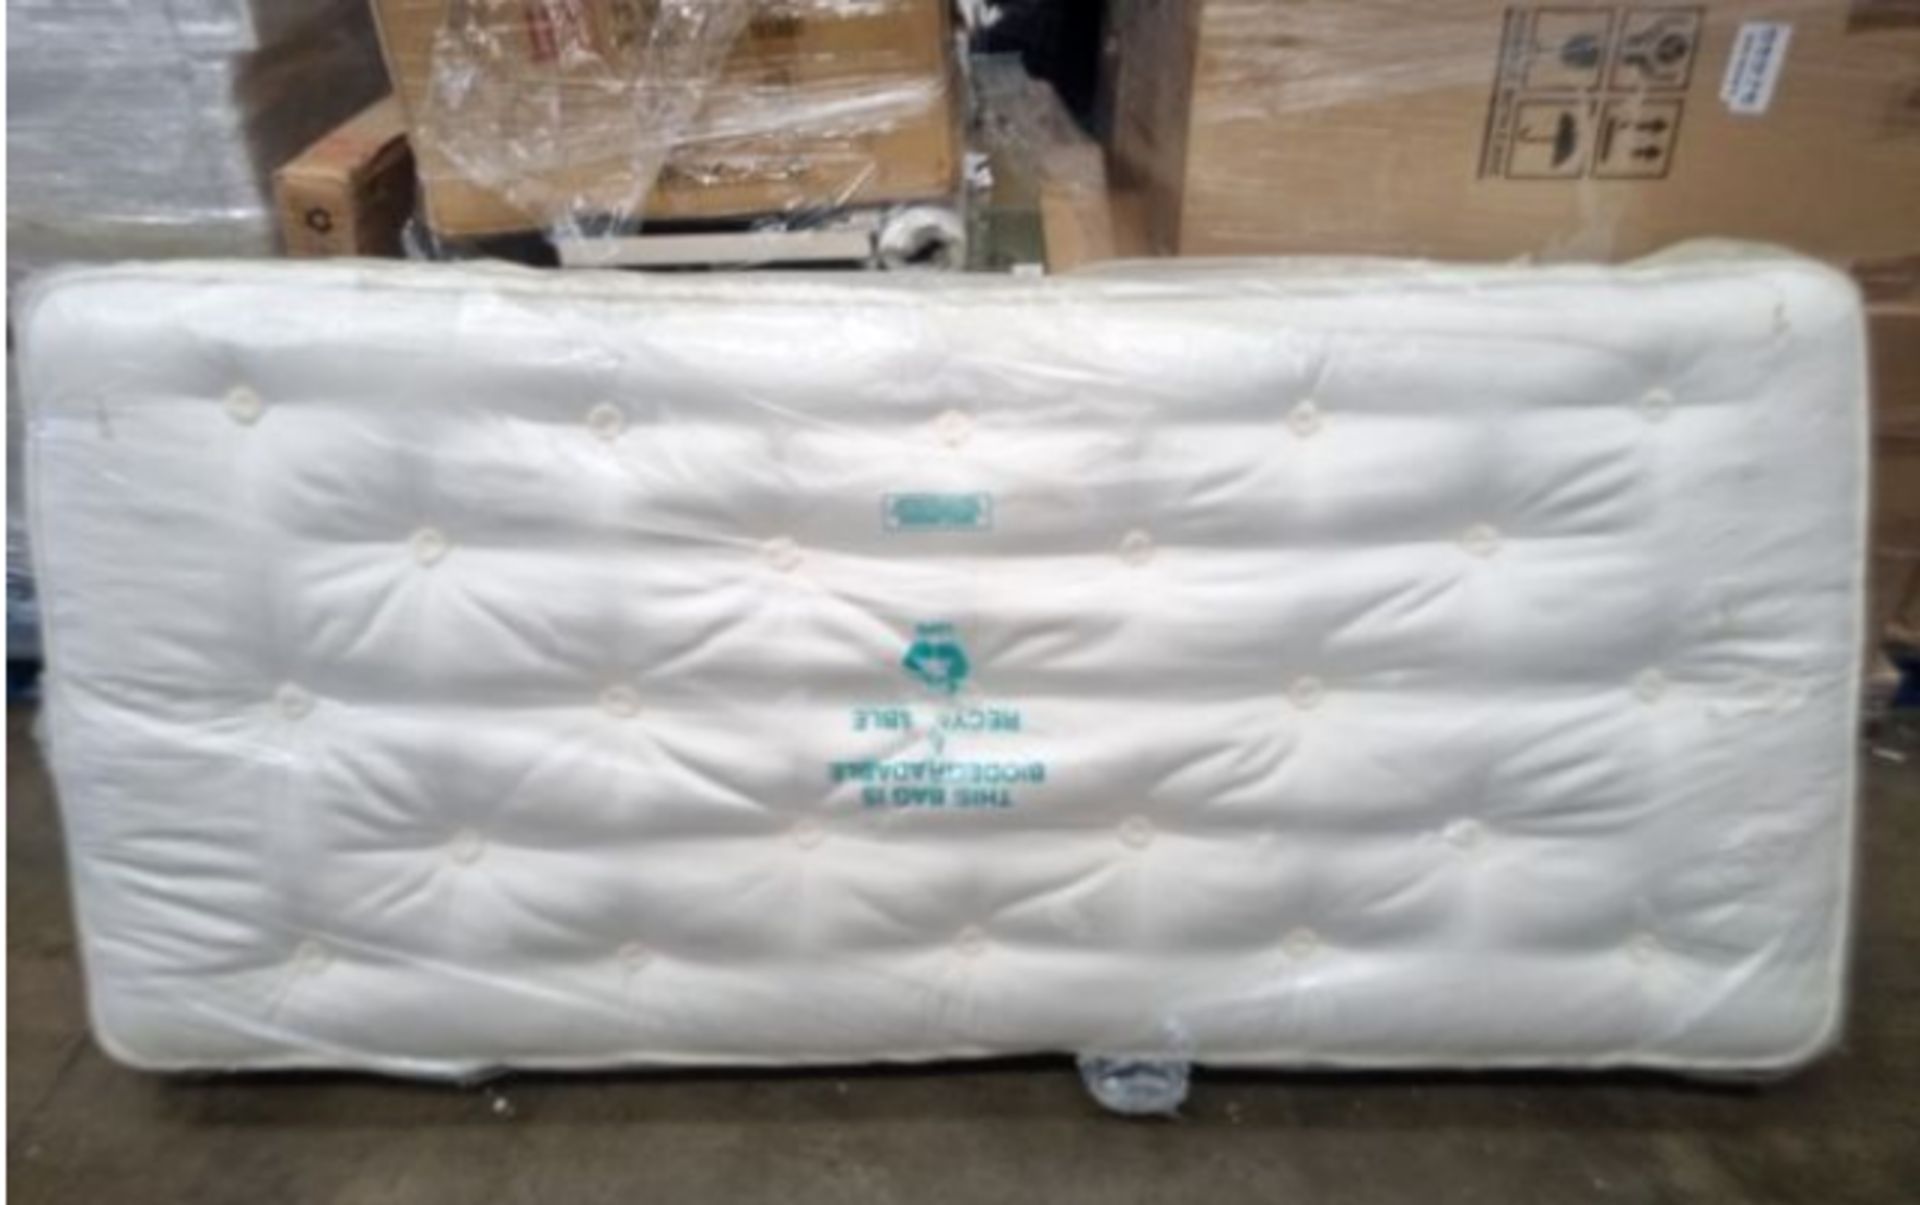 Grade C John Lewis & Partners thick single mattress in White -Silk 19400 Ortho Spec 180ZL - Image 4 of 4